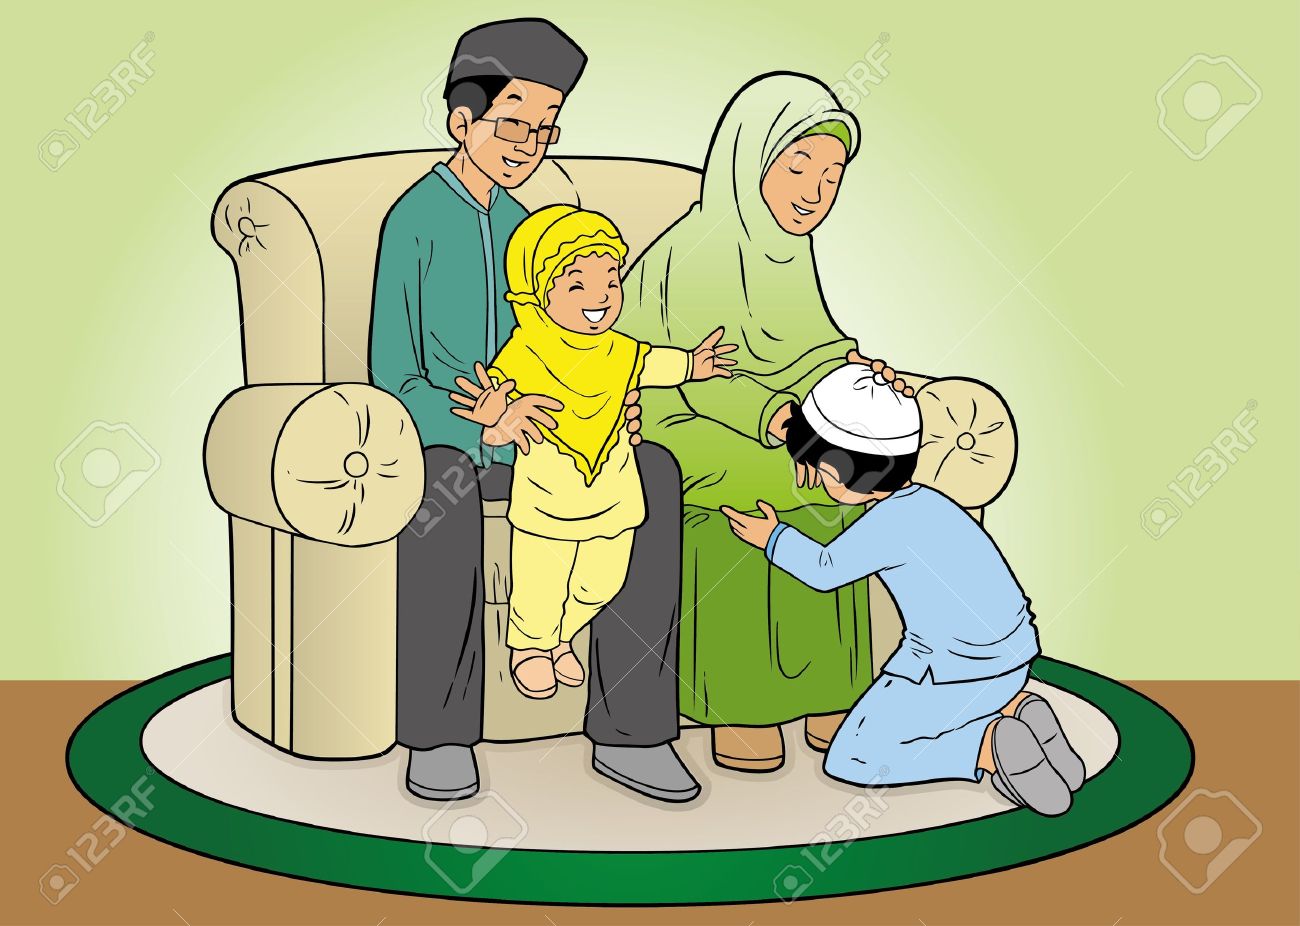 Indonesian Muslim Family In Forgiveness Tradition Royalty